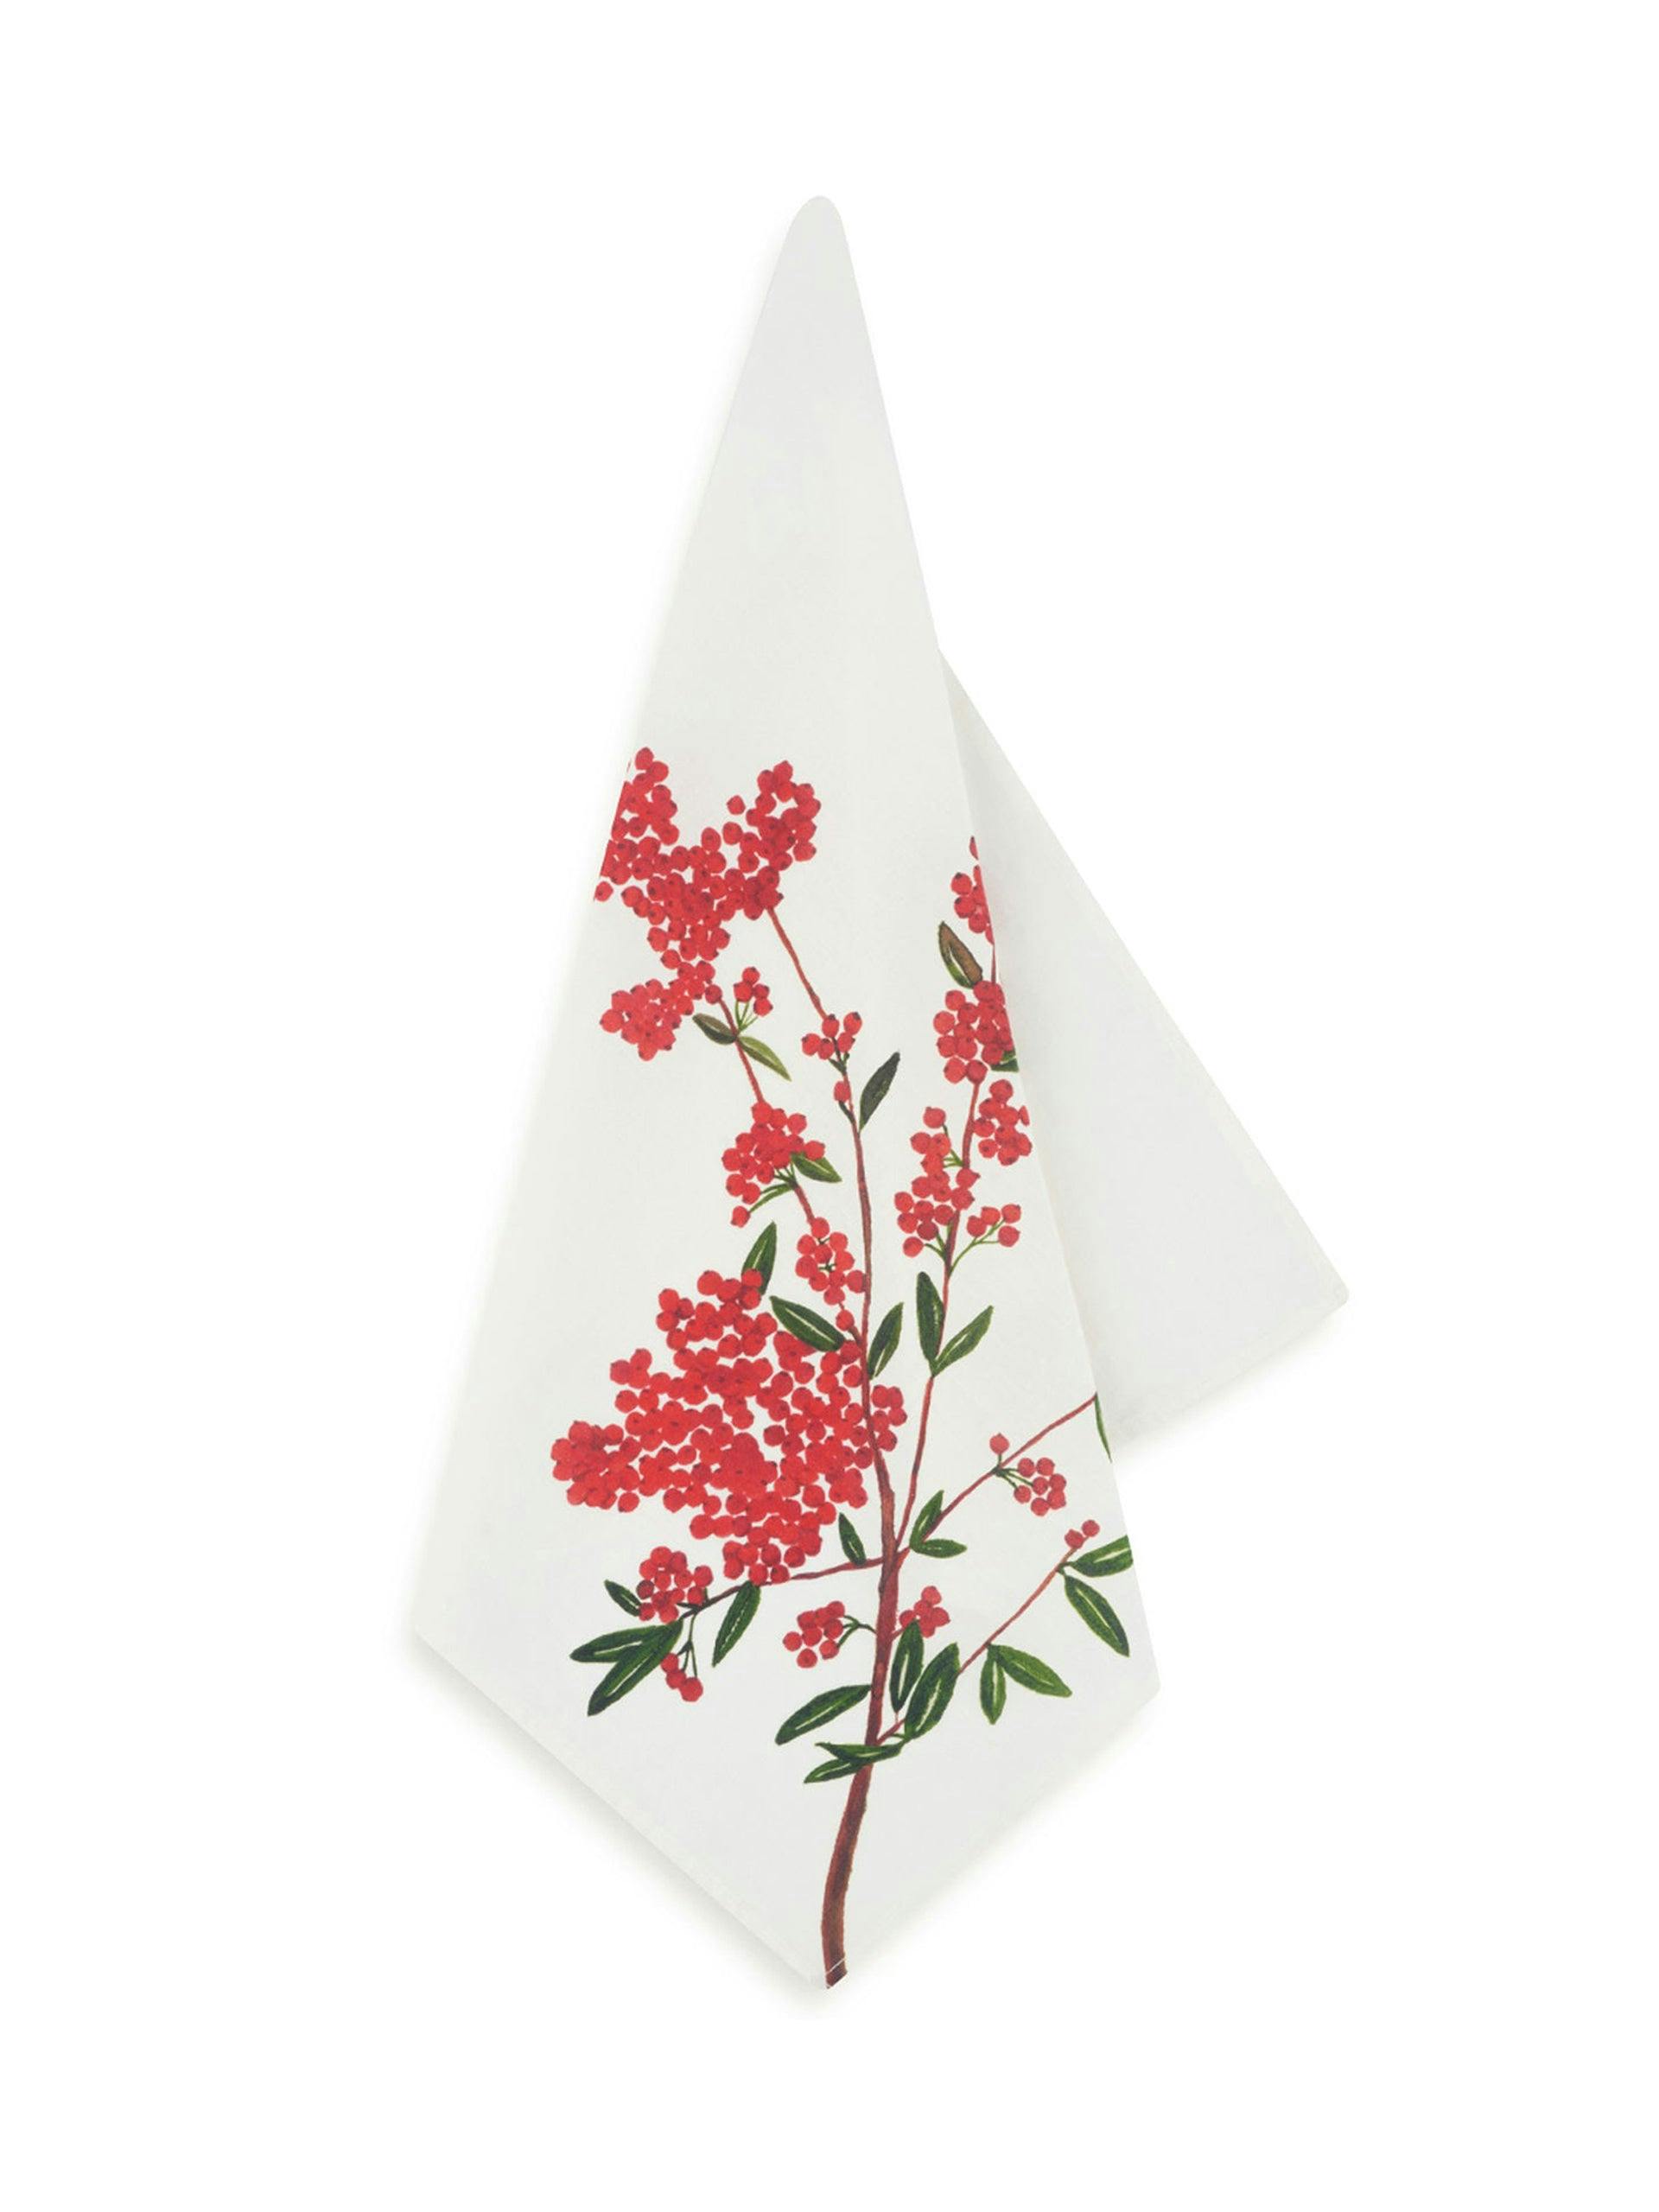 Linen napkin with red berries